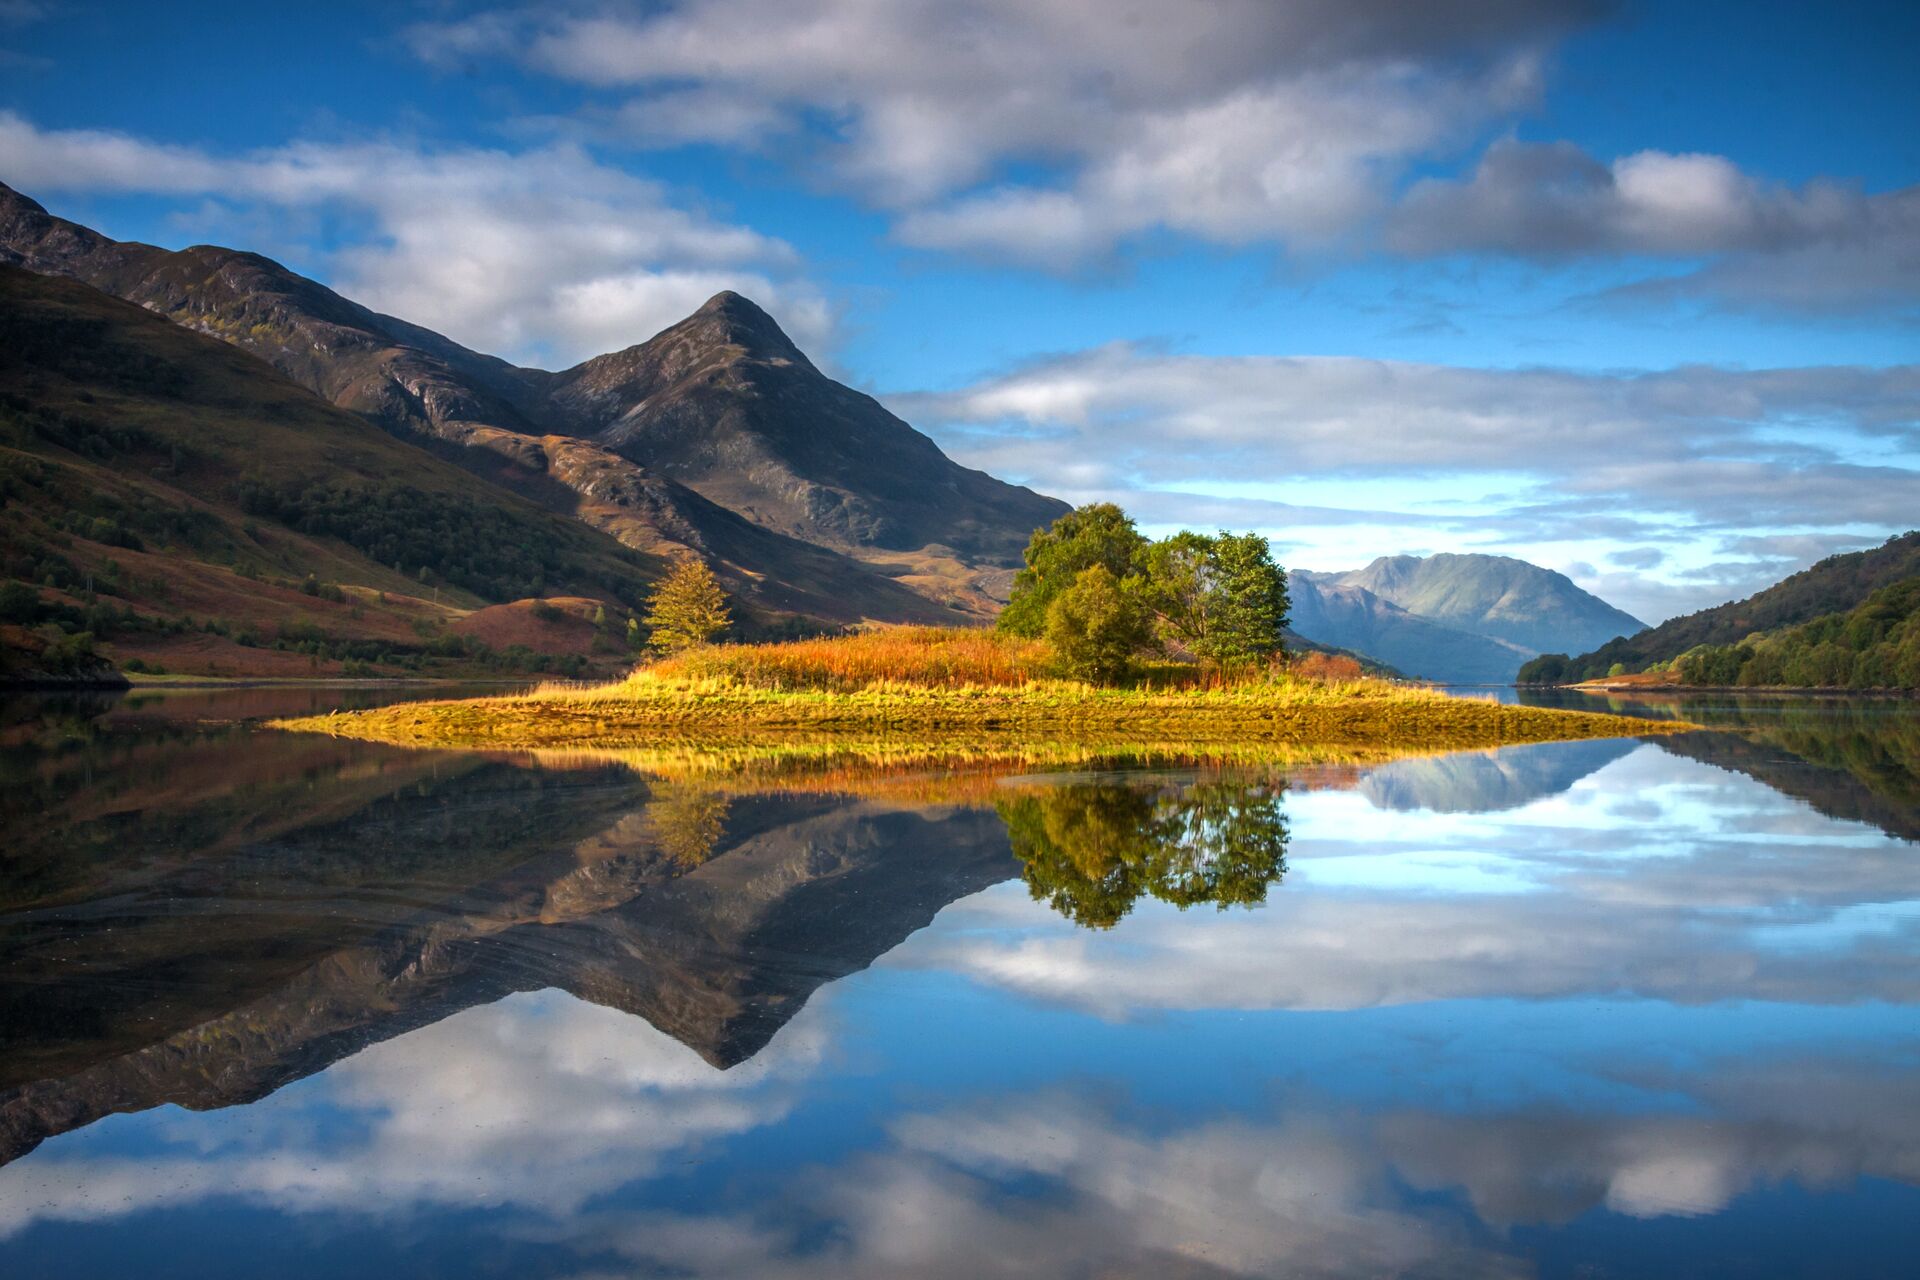 Blue skies, white clouds, a rugged mountain and foreground trees are perfectly reflected in a Scottish lake